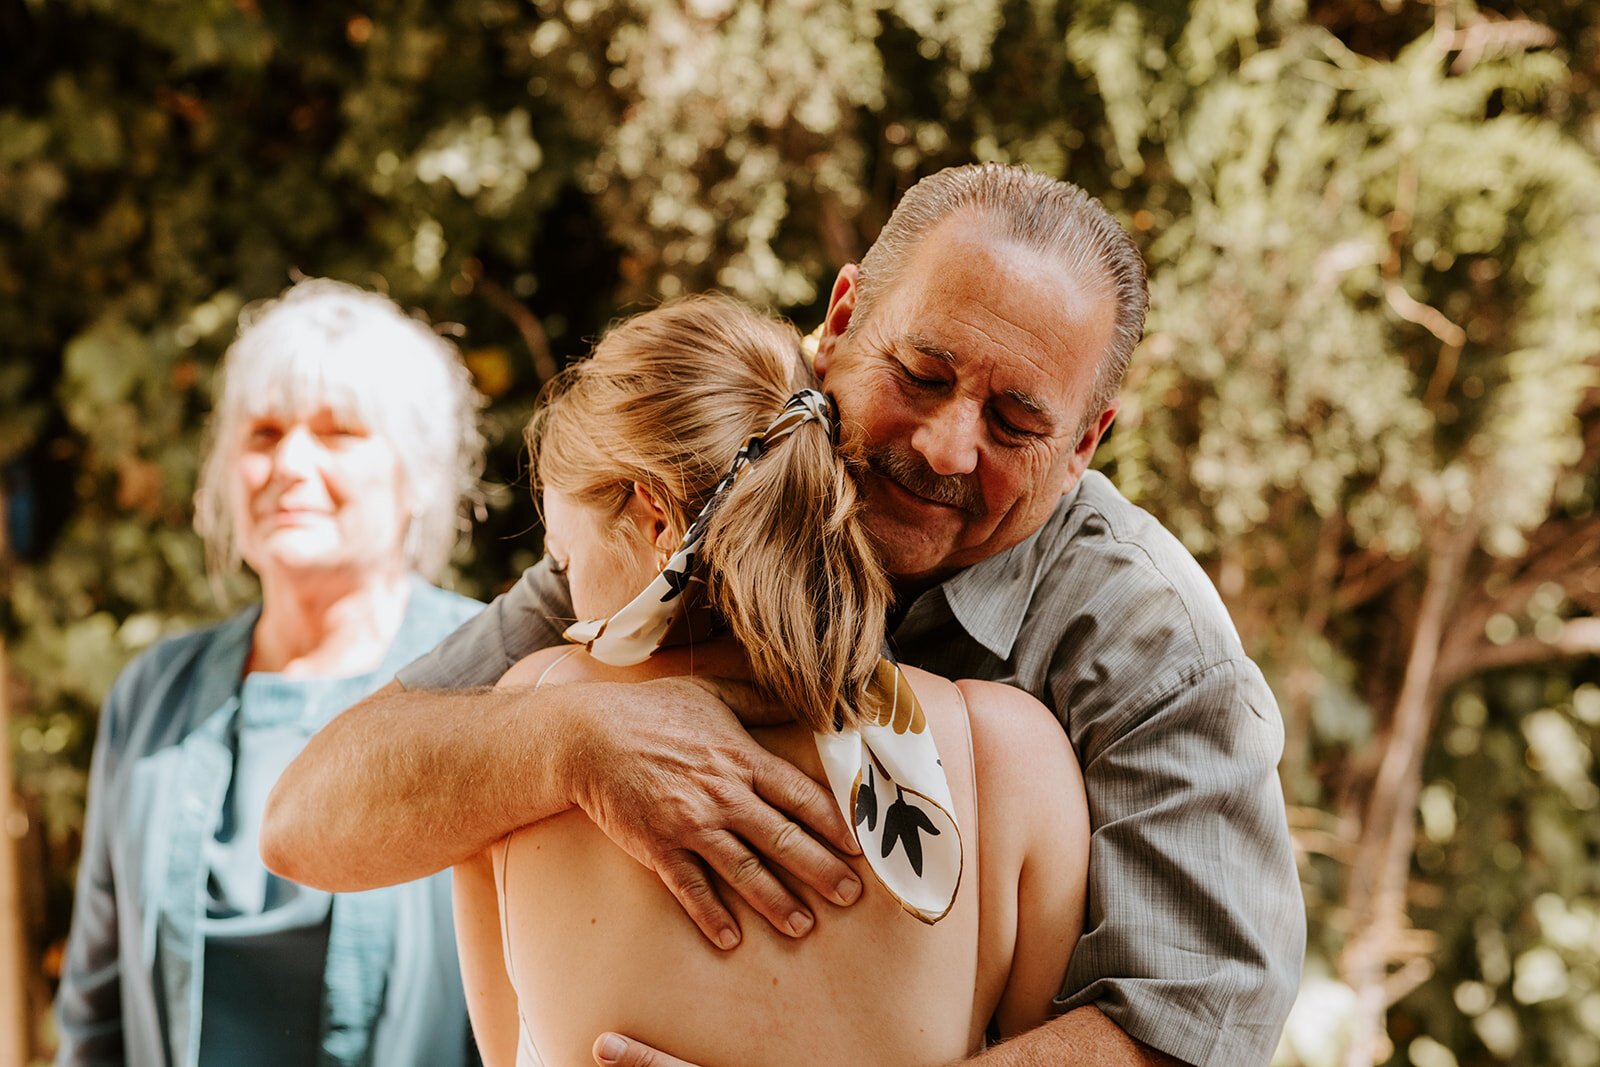 Bride hugging family, Los Angeles airbnb wedding, zoom wedding, virtual wedding, covid wedding, Los Angeles elopement, Los Angeles Wedding Photographer, Photo by Tida Svy | www.tidasvy.com